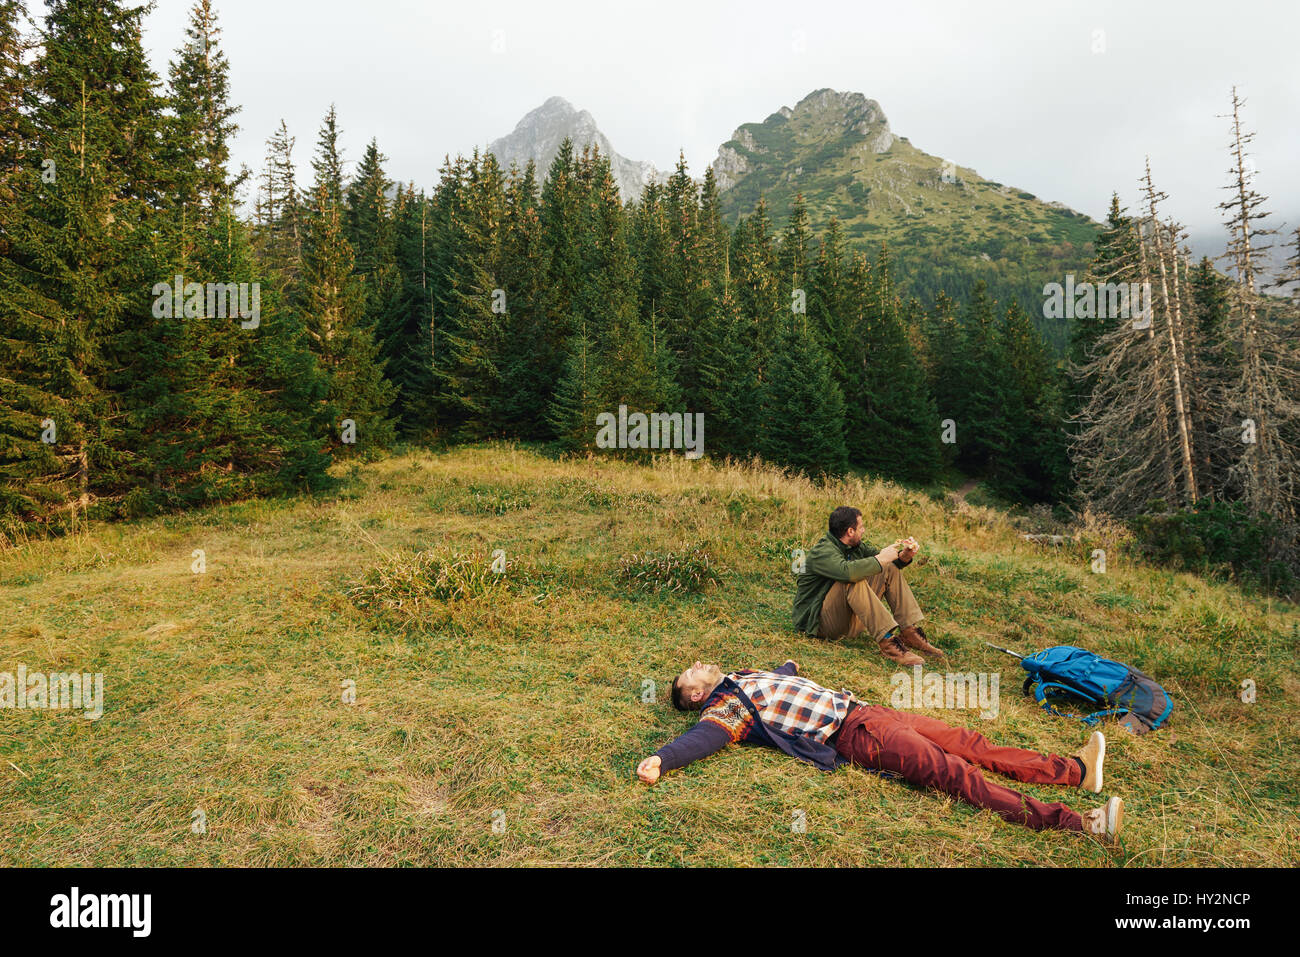 Exhausted hikers lying on grass after a trek Stock Photo